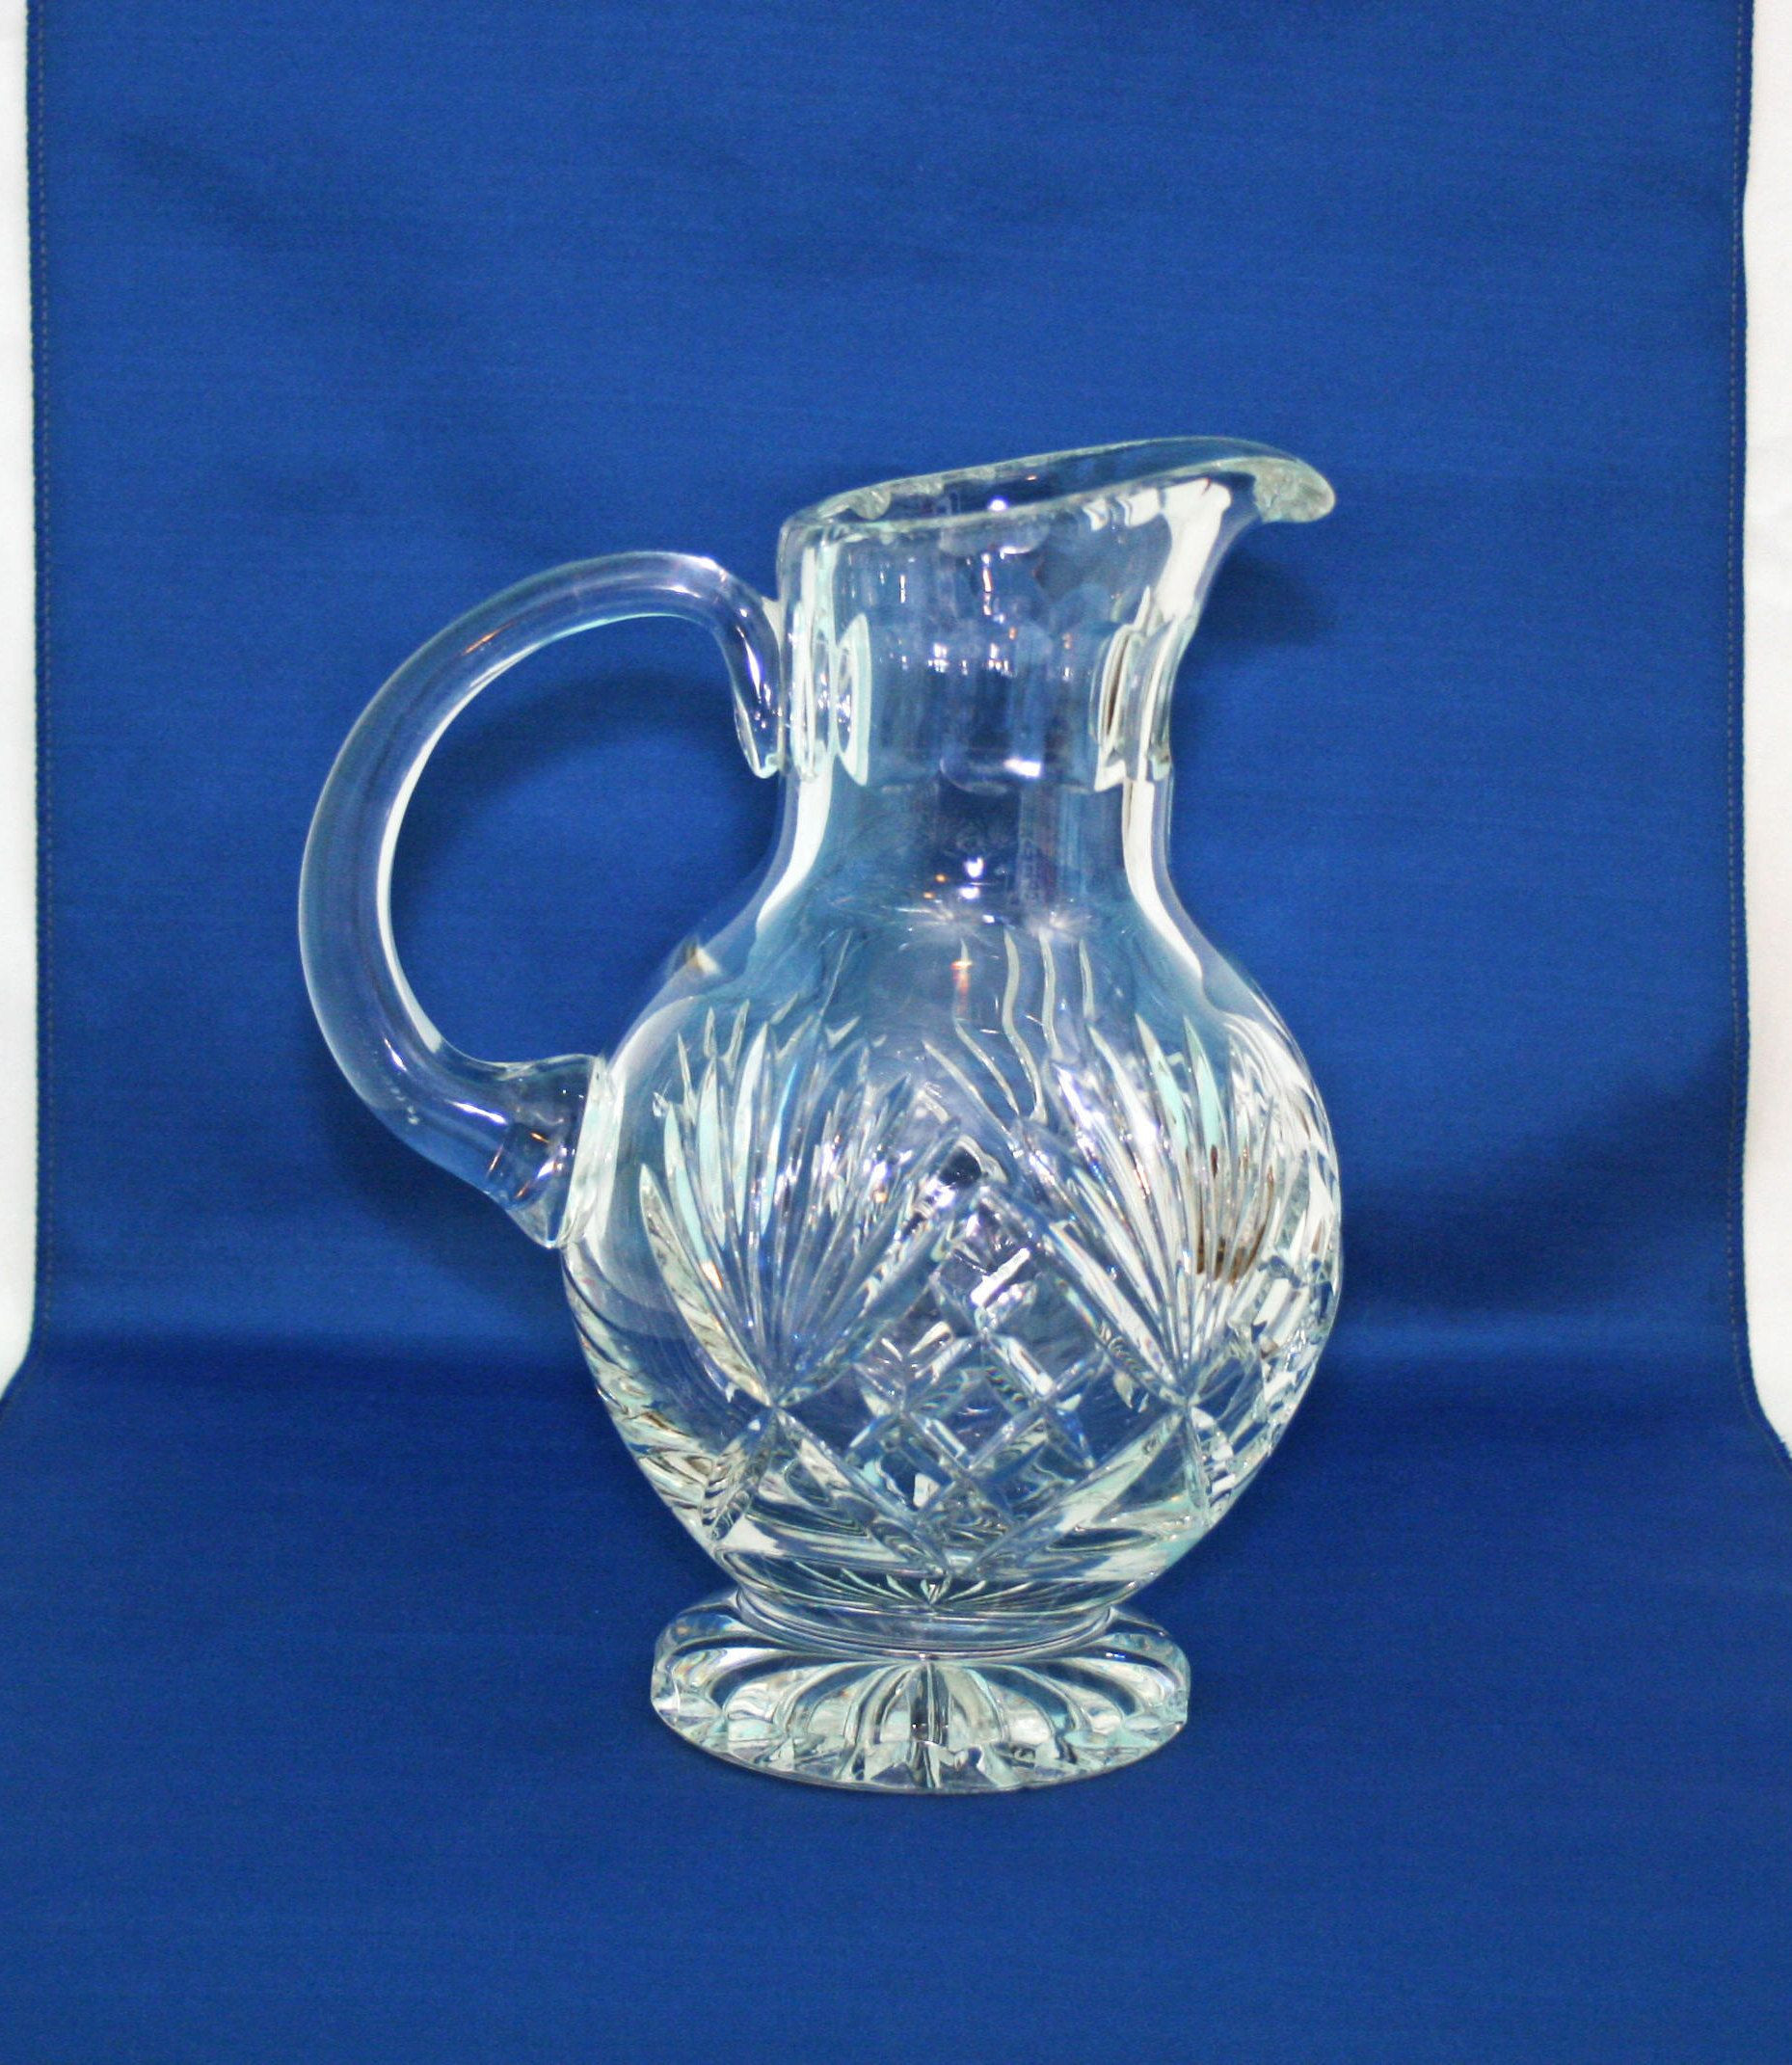 27 Stylish Polonia Lead Crystal Vase 2024 free download polonia lead crystal vase of vintage polonia crystal ball pitcher made in poland heavy 24 lead with regard to vintage polonia crystal ball pitcher made in poland heavy 24 lead crystal footed